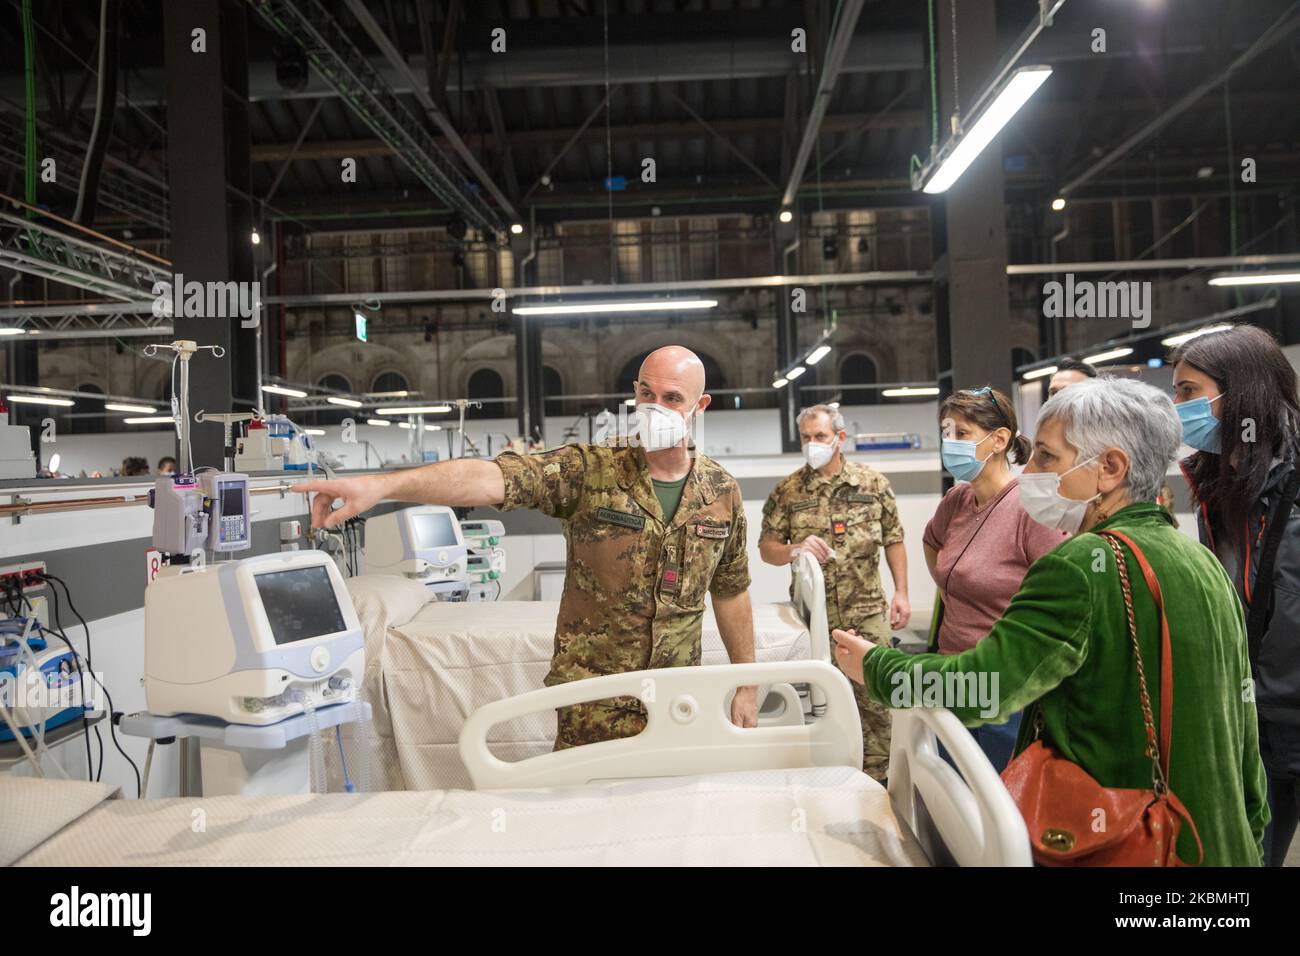 The Italian Army helped set up the hospital on April 18, 2020 in Turin, Italy. The 'Officine grandi riparazioni OGR' will house a large temporary hospital with an intensive care unit, sub-intensive care unit and places for hospitalization. (Photo by Mauro Ujetto/NurPhoto) Stock Photo